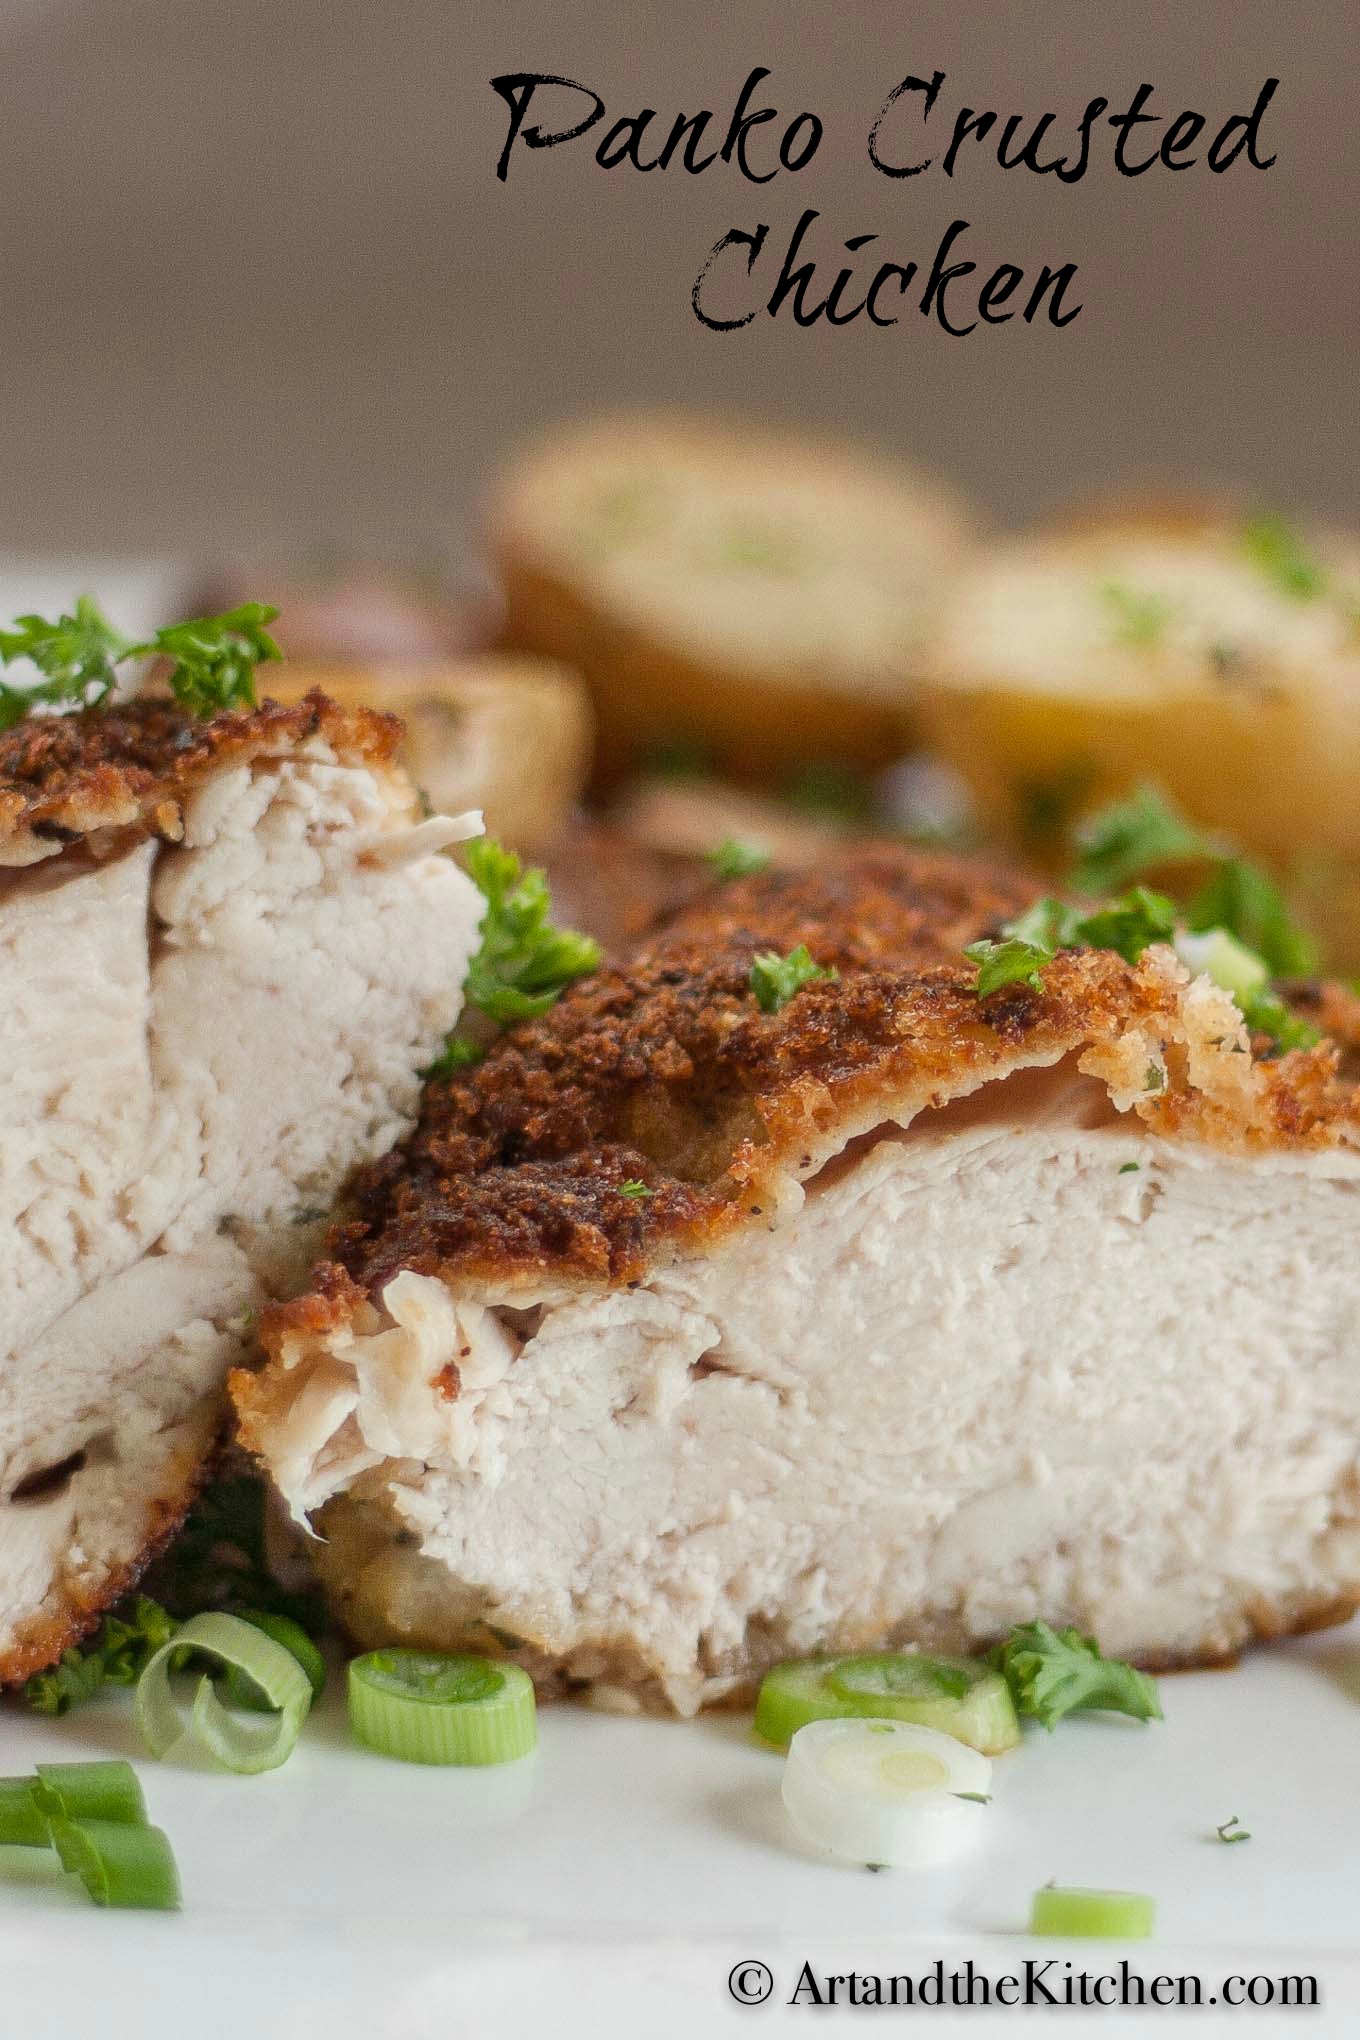 Chicken breast crusted with panko bread crumbs, cut in half on white plate garnished with green onion slices.